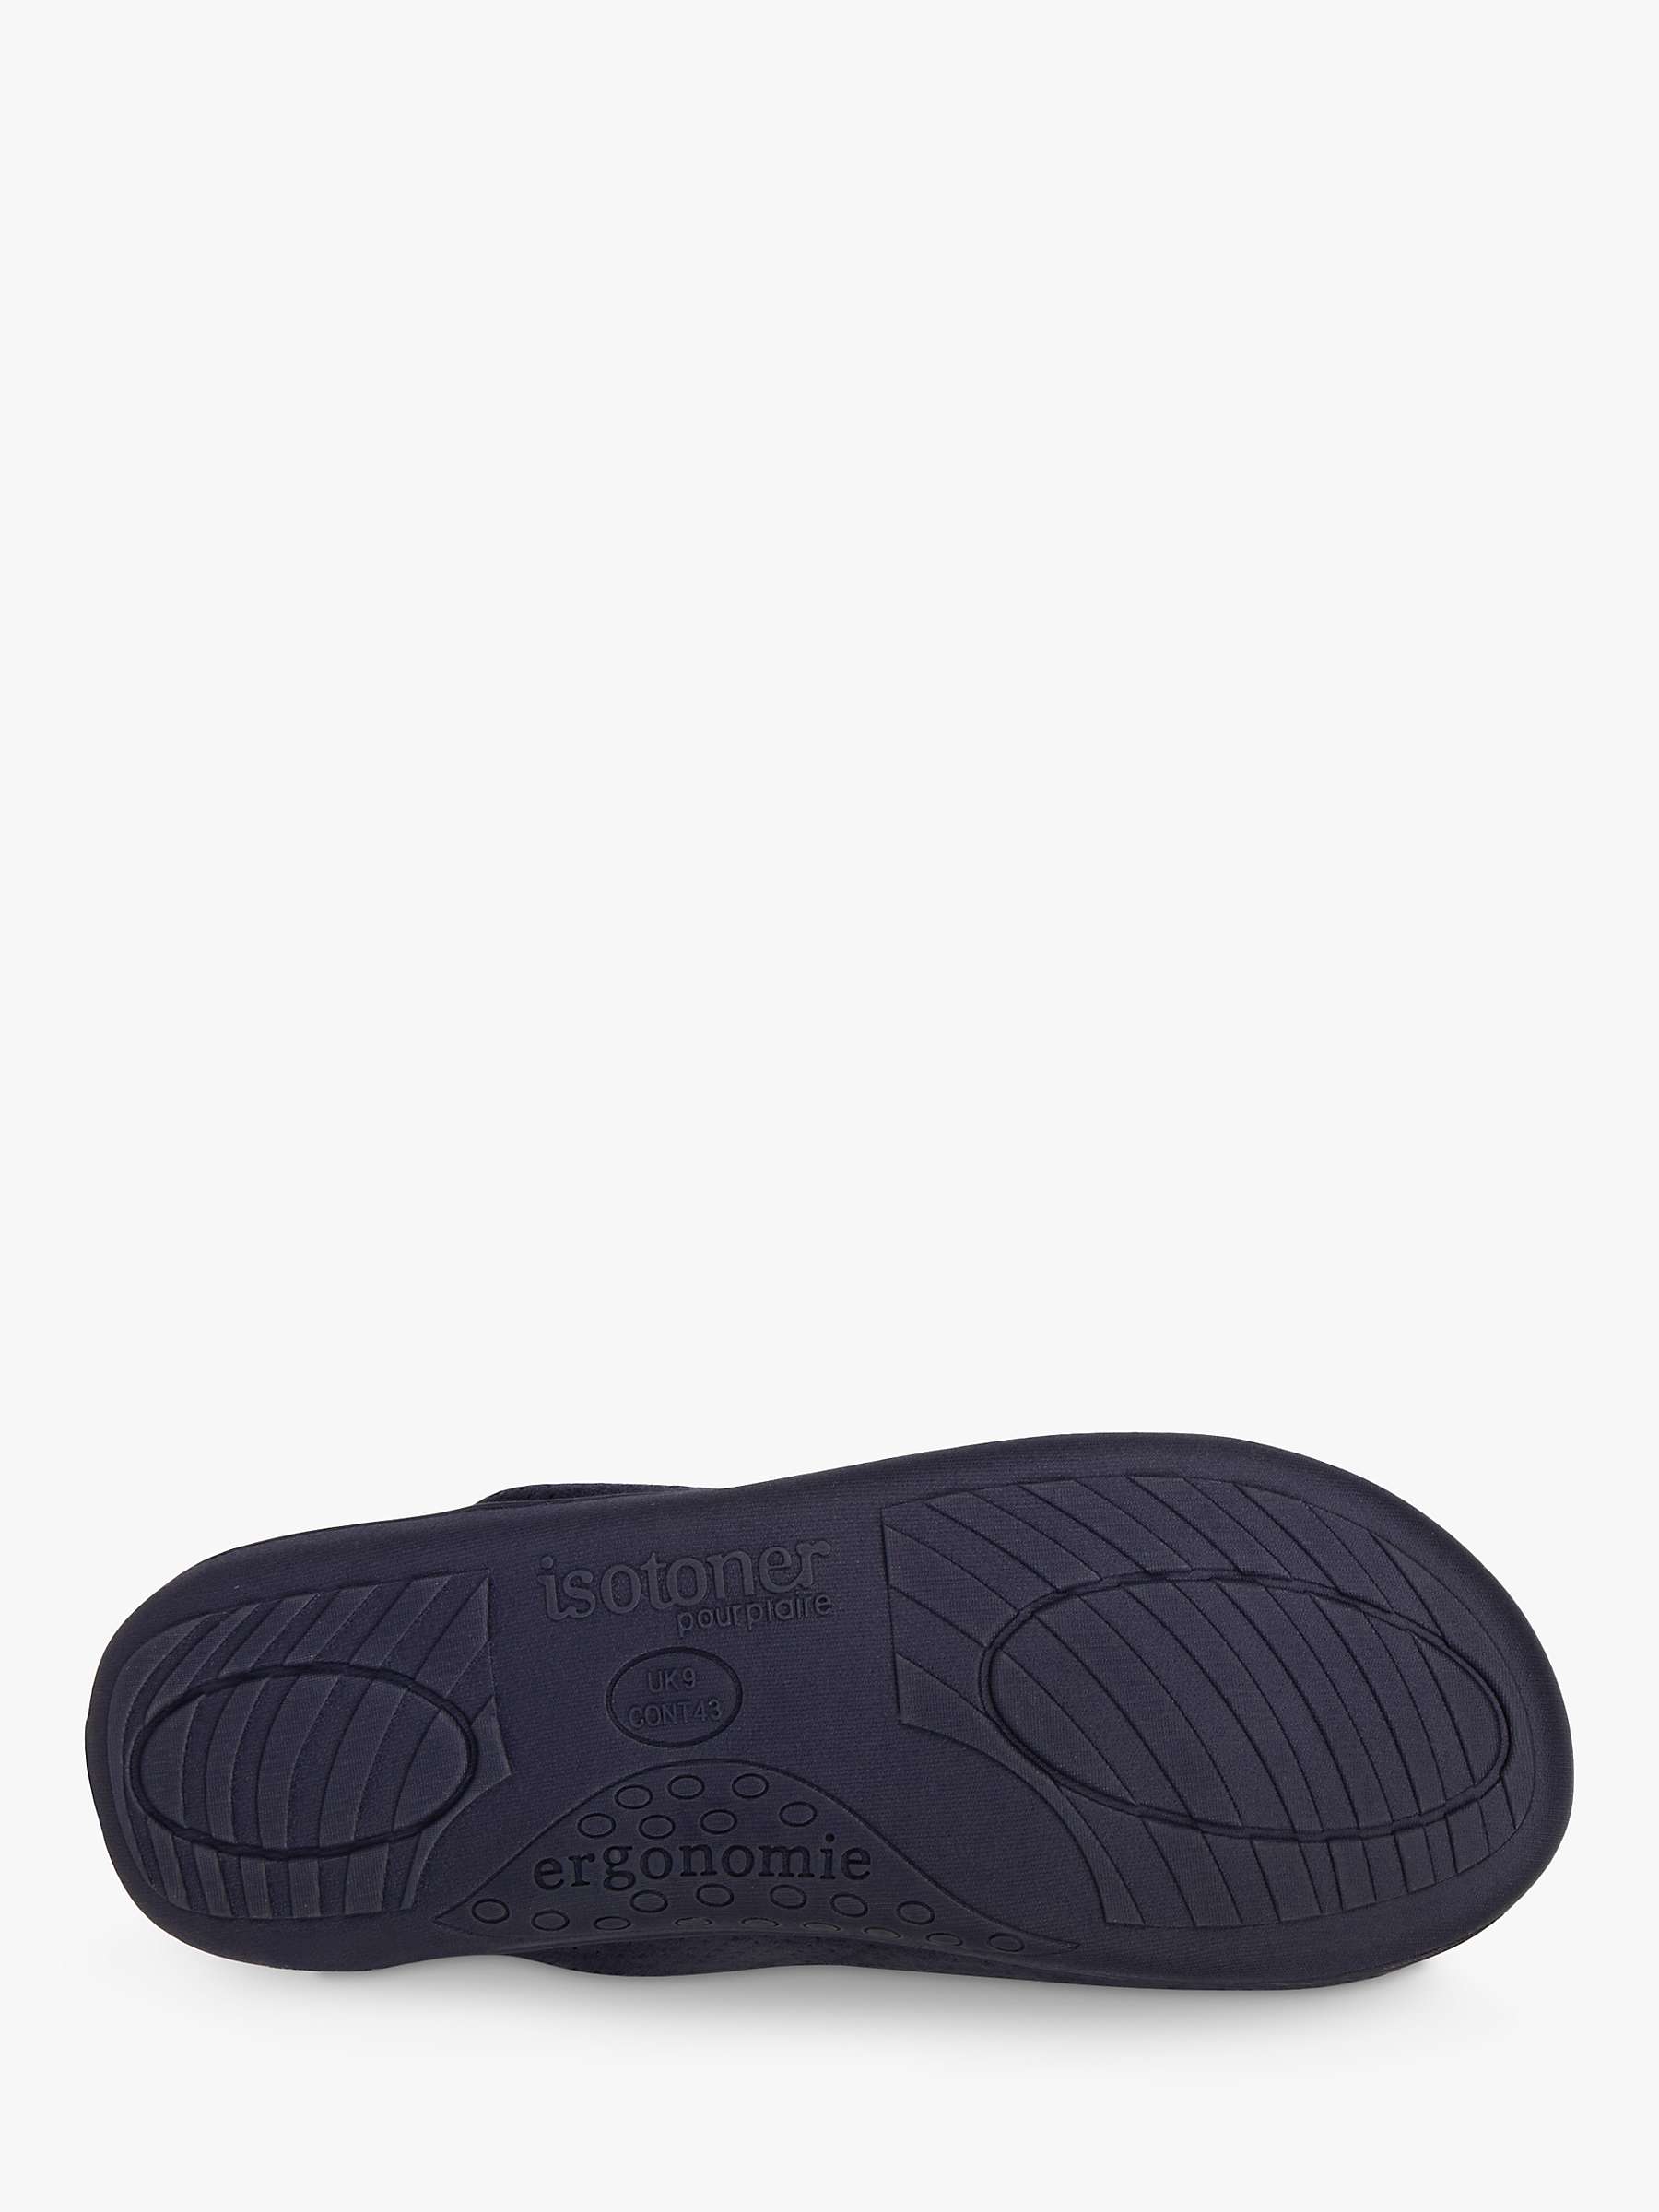 Buy totes Airtex Suedette Mule Slippers Online at johnlewis.com